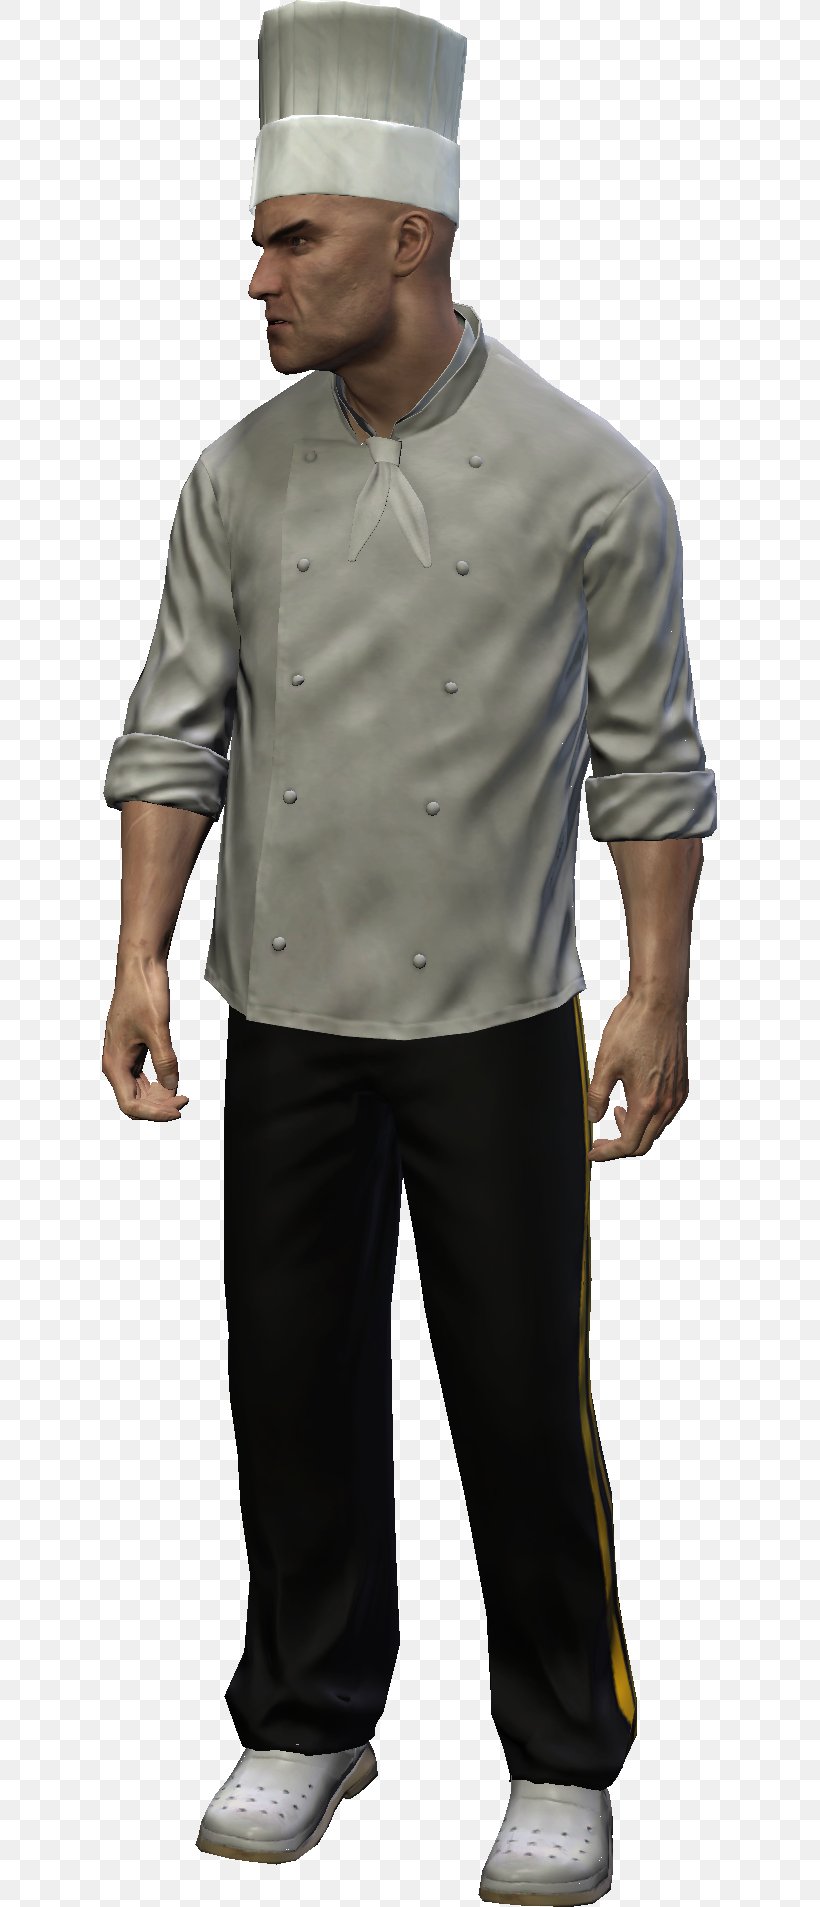 Hitman: Absolution Hitman: Codename 47 PlayStation 4 Agent 47, PNG, 615x1907px, Hitman, Agent 47, Chef, Cooking, Costume Download Free